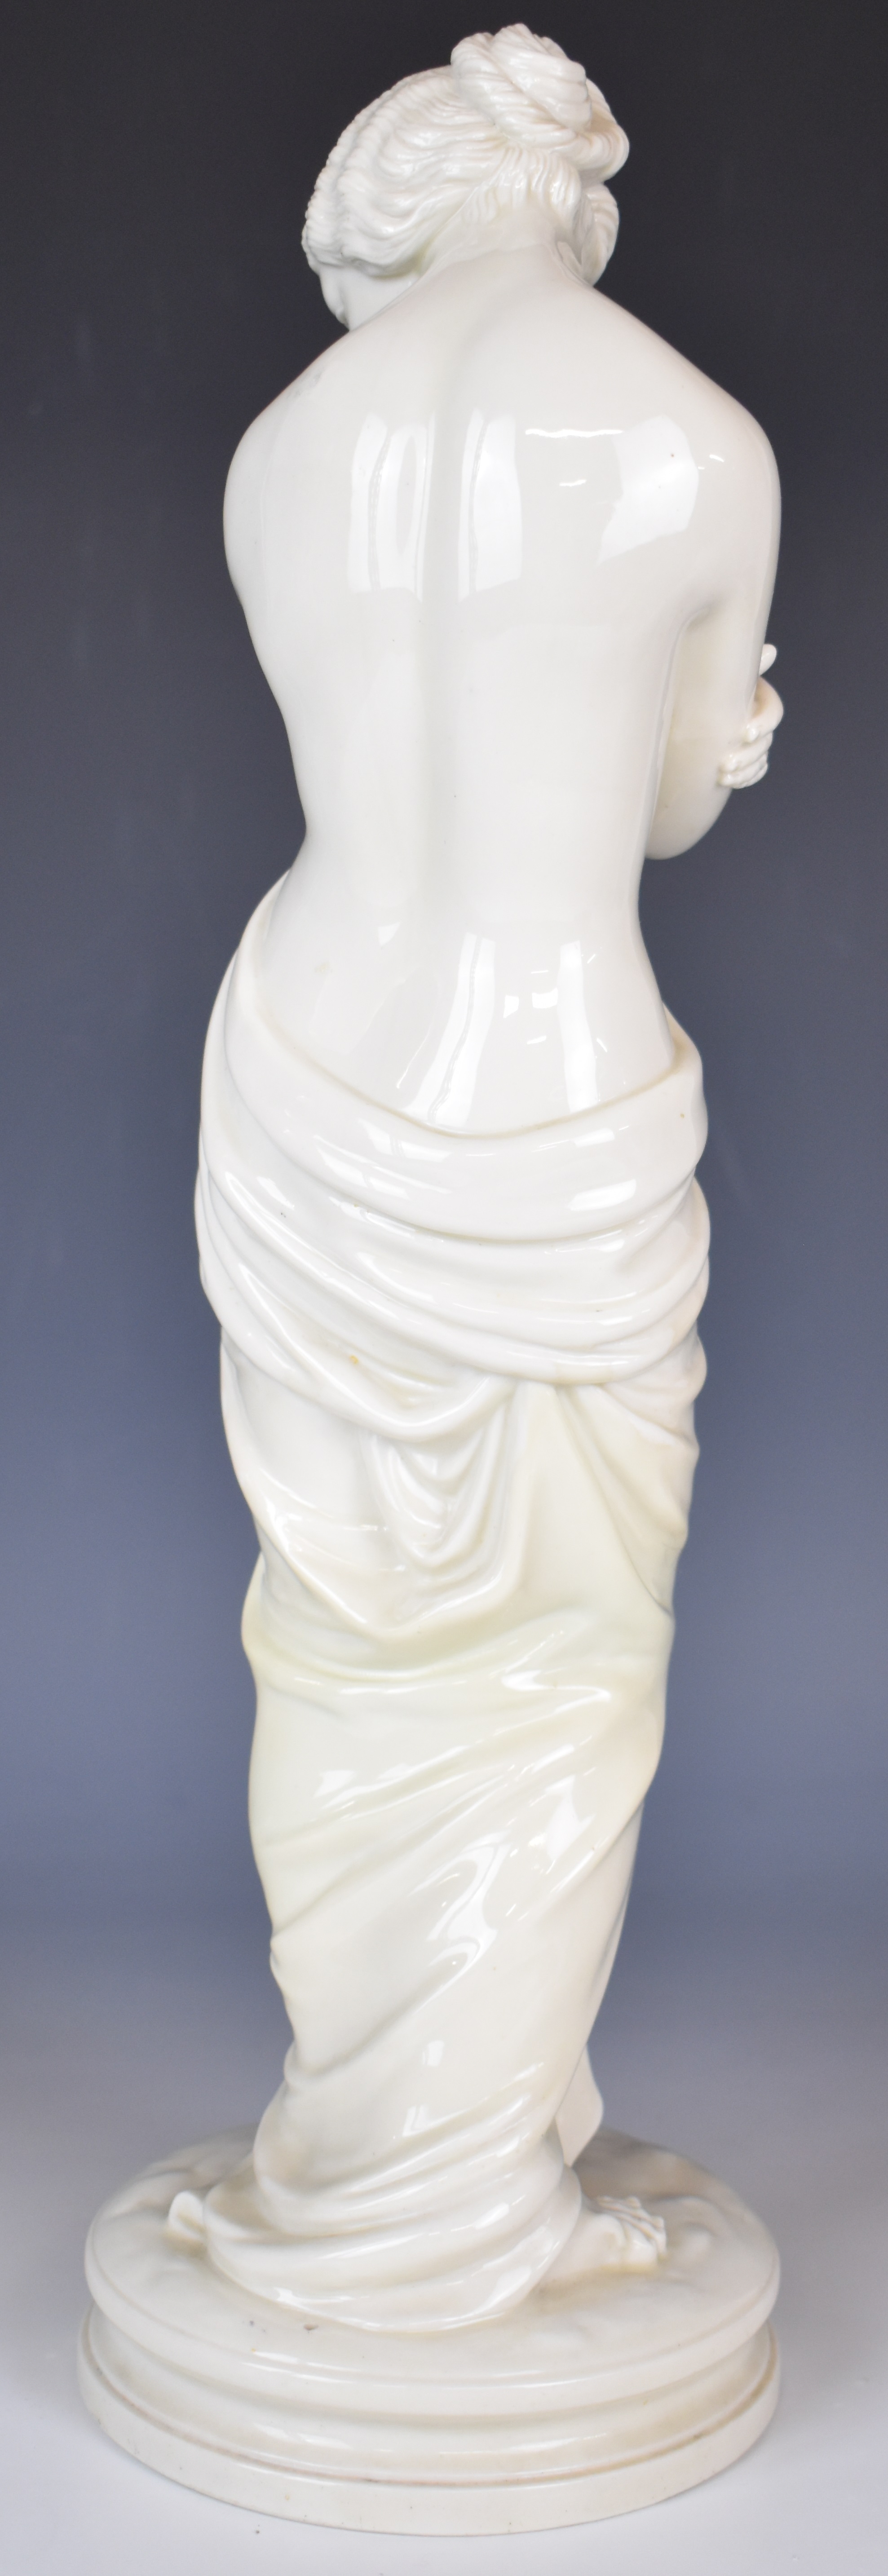 Royal Worcester 19thC figurine titled Joy, possibly of Aphrodite holding a dove, height 43.5cm - Image 3 of 5